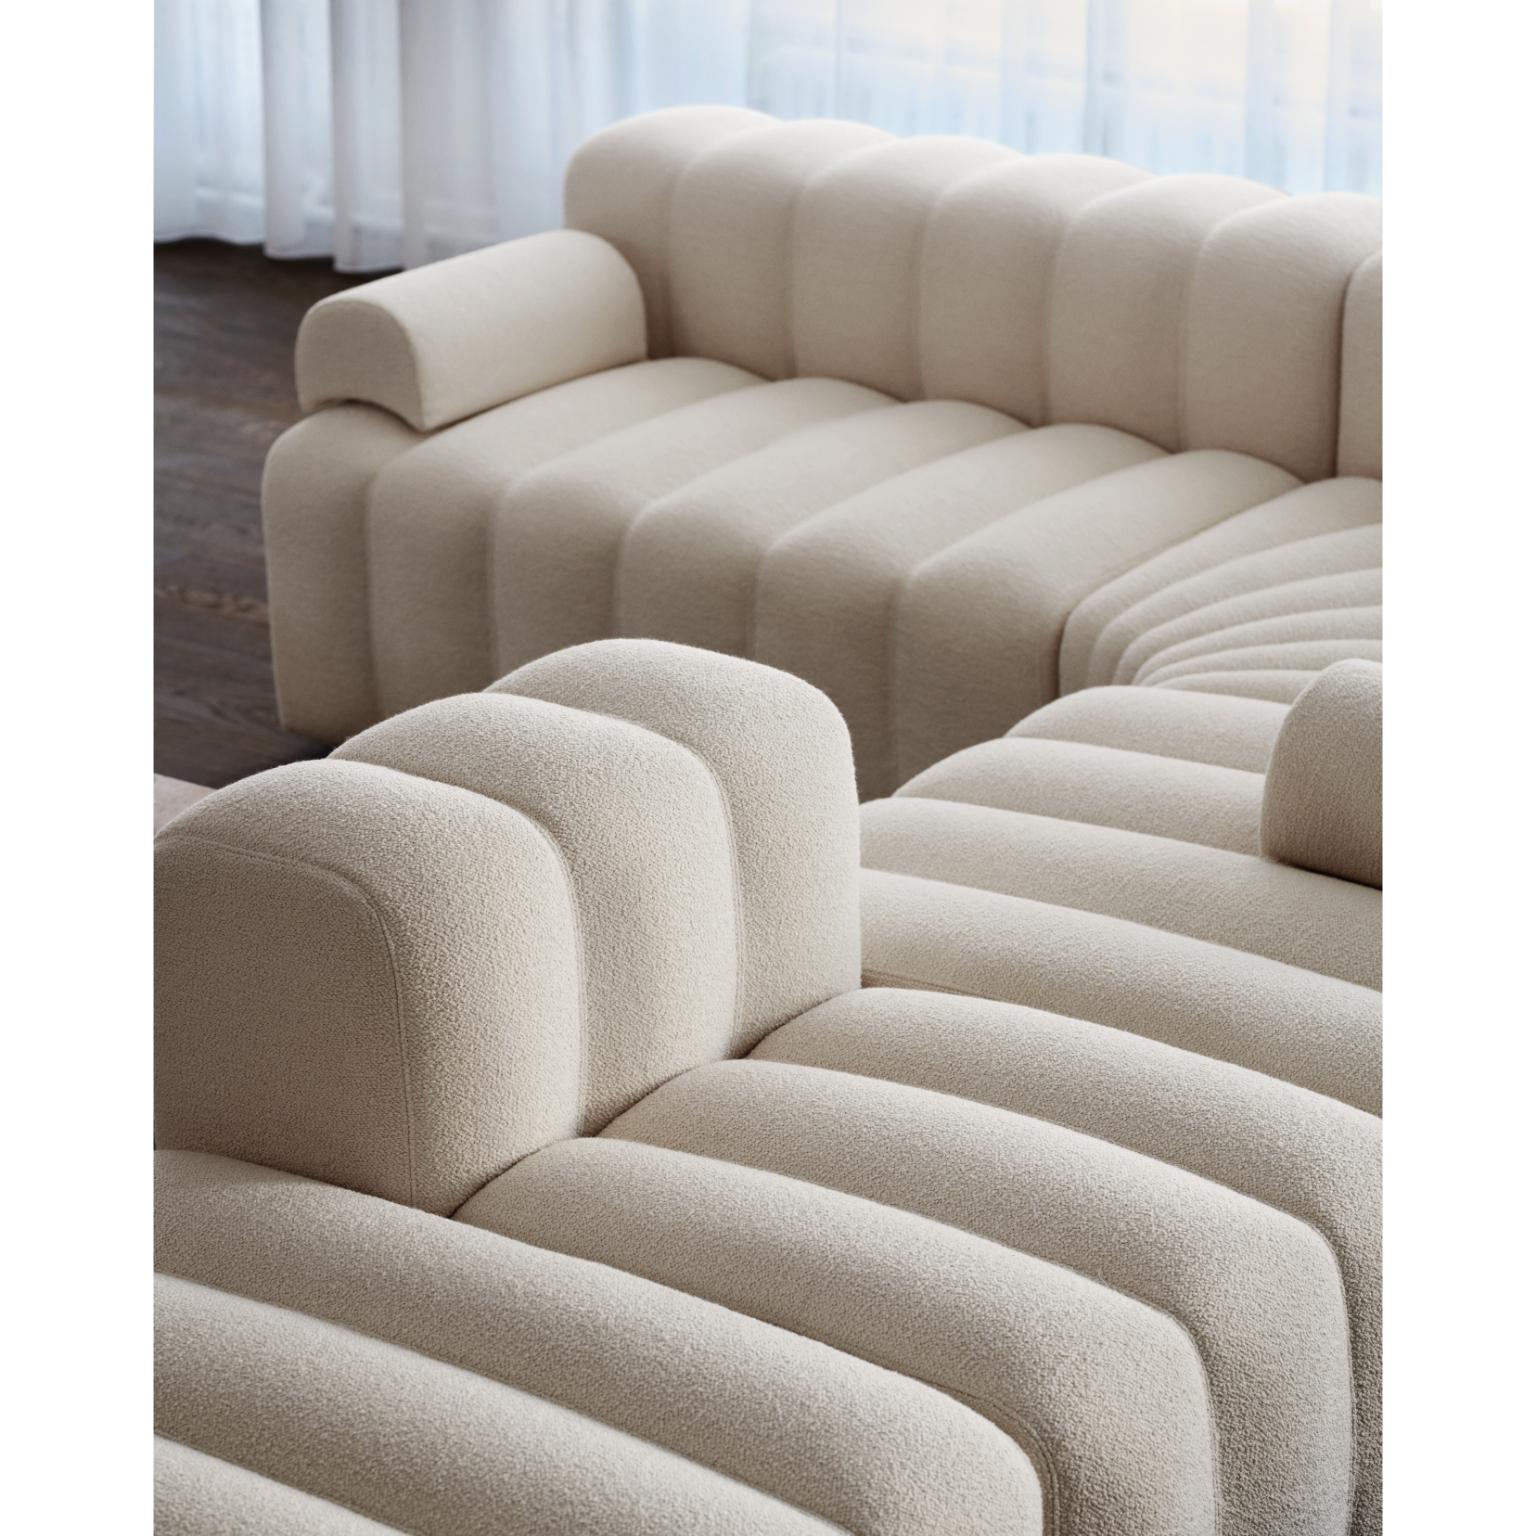 Studio Large Cushion by NORR11
Dimensions: W 50 x H 60 cm.
Materials: Foam, wood and upholstery.
Upholstery: Barnum Boucle Color 3.

Available in different upholstery options. Prices may vary. A plywood structure with elastic belts & foam. Different